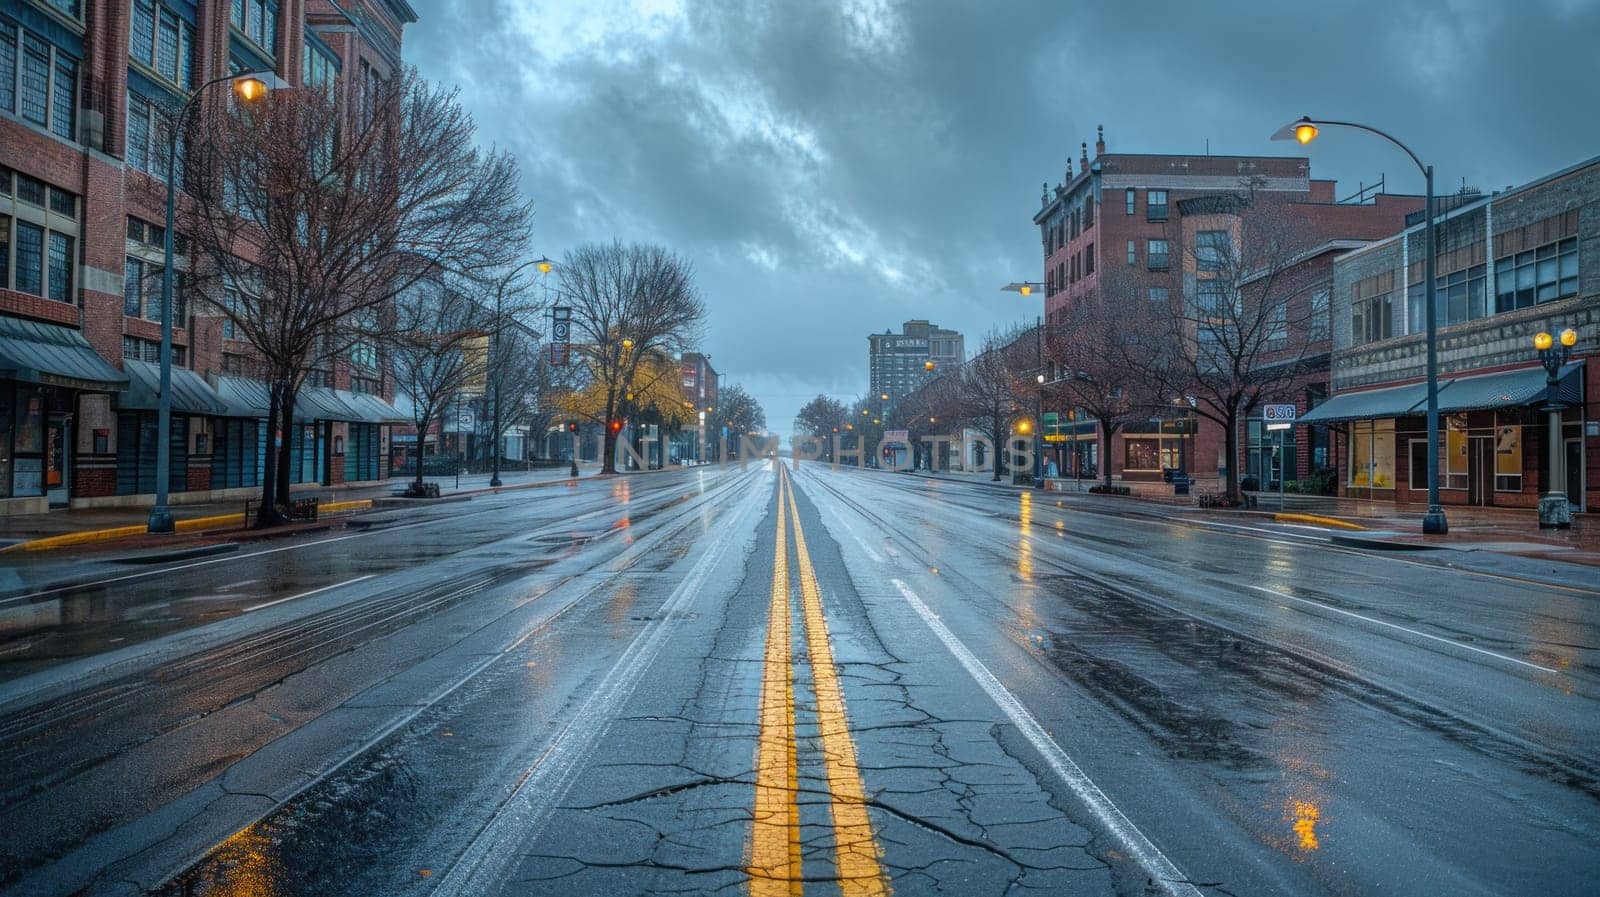 Gray clouds looming over a deserted city street on a gloomy Monday morning..